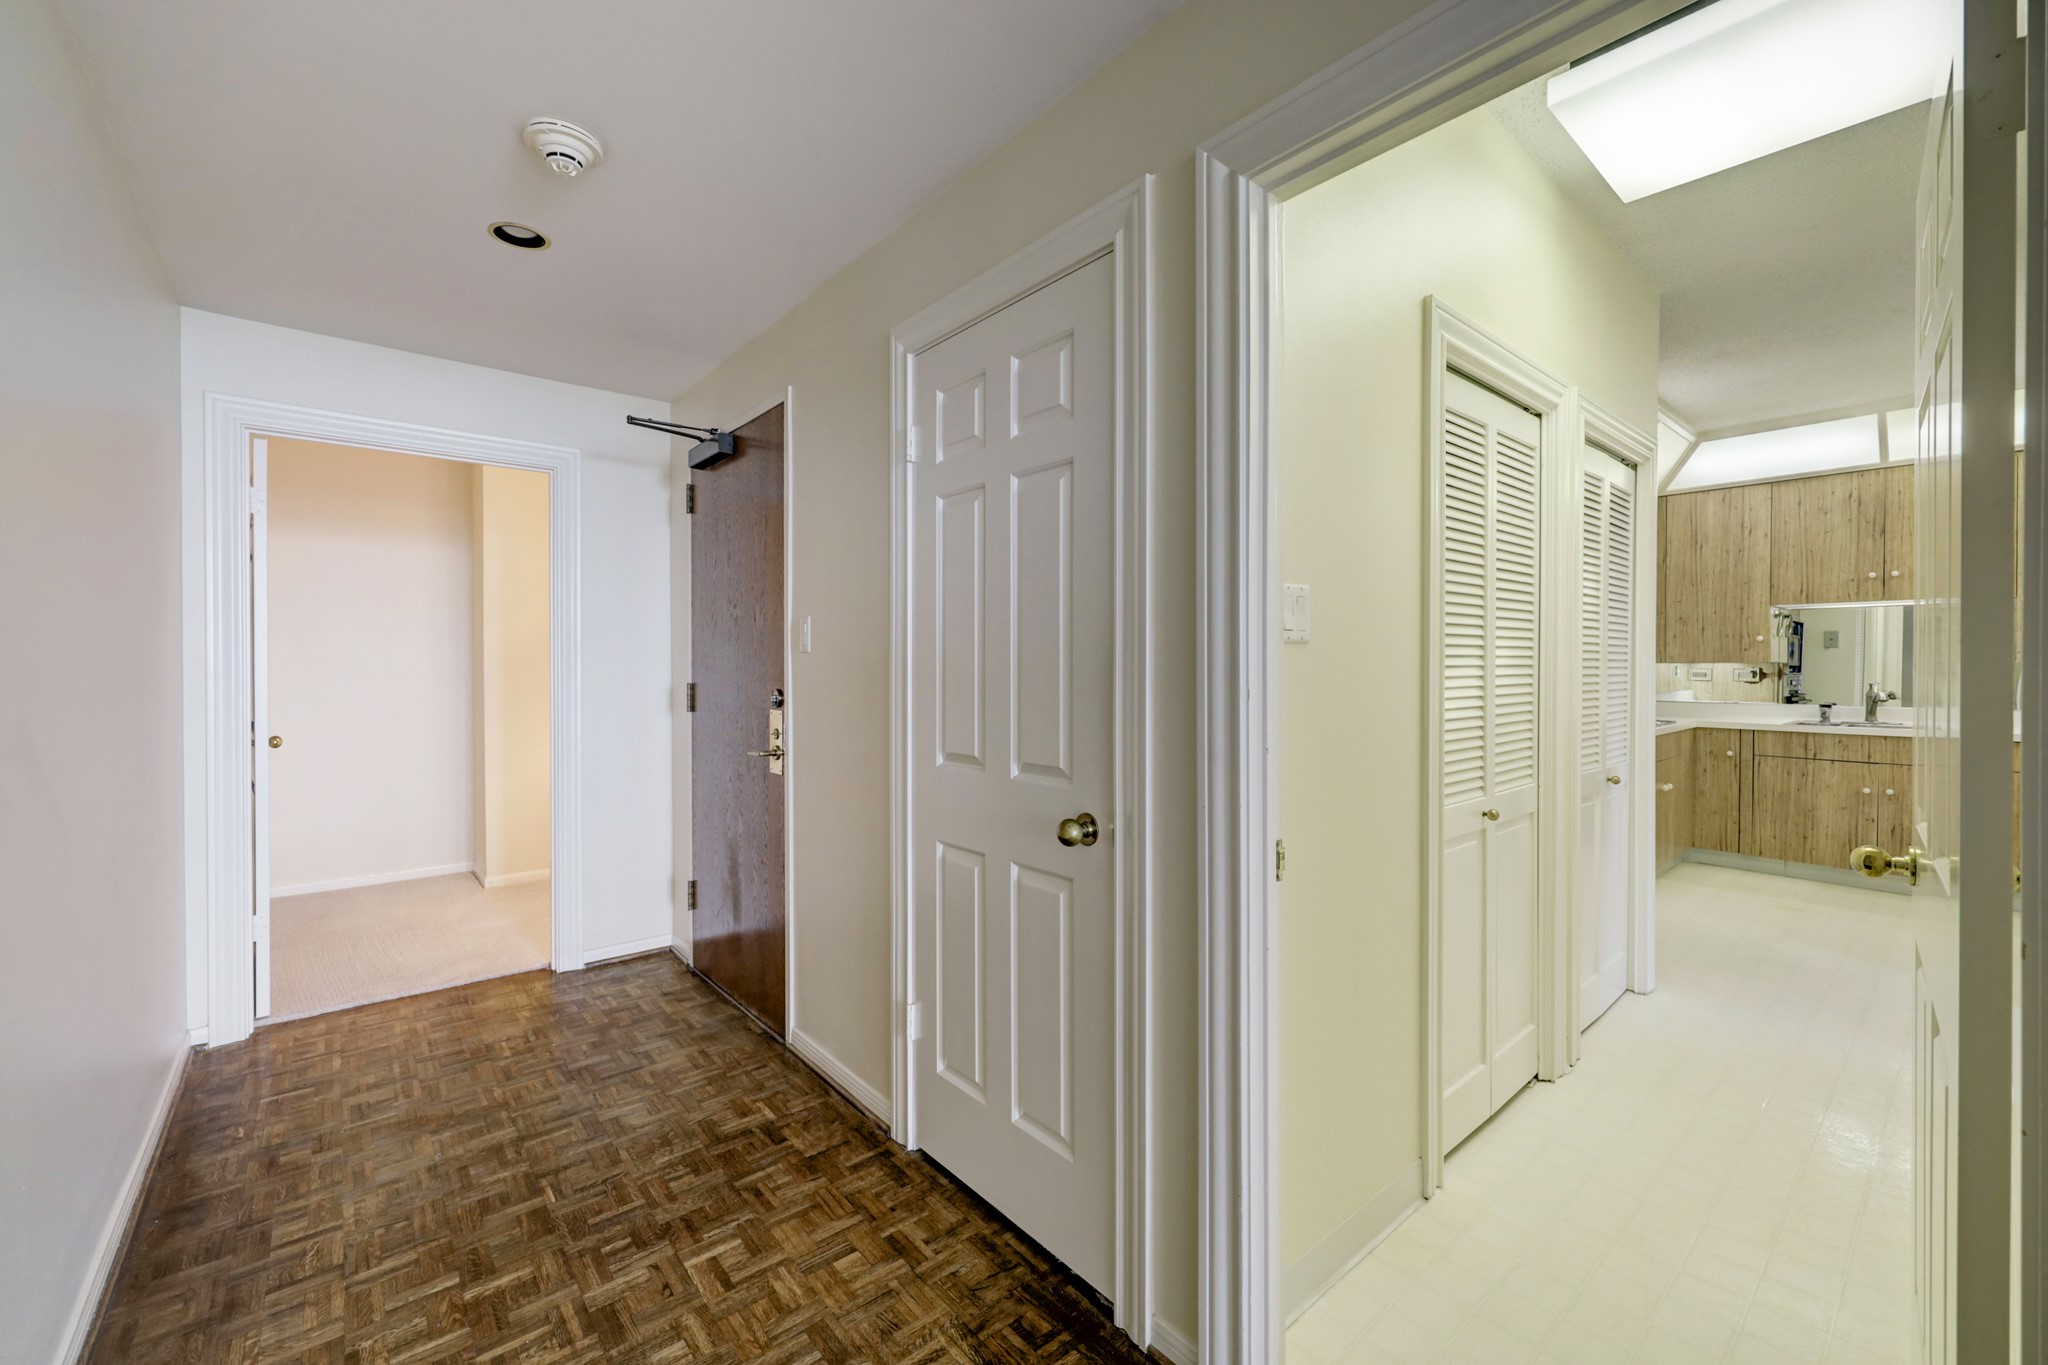 ENTRY HALL TO UNIT